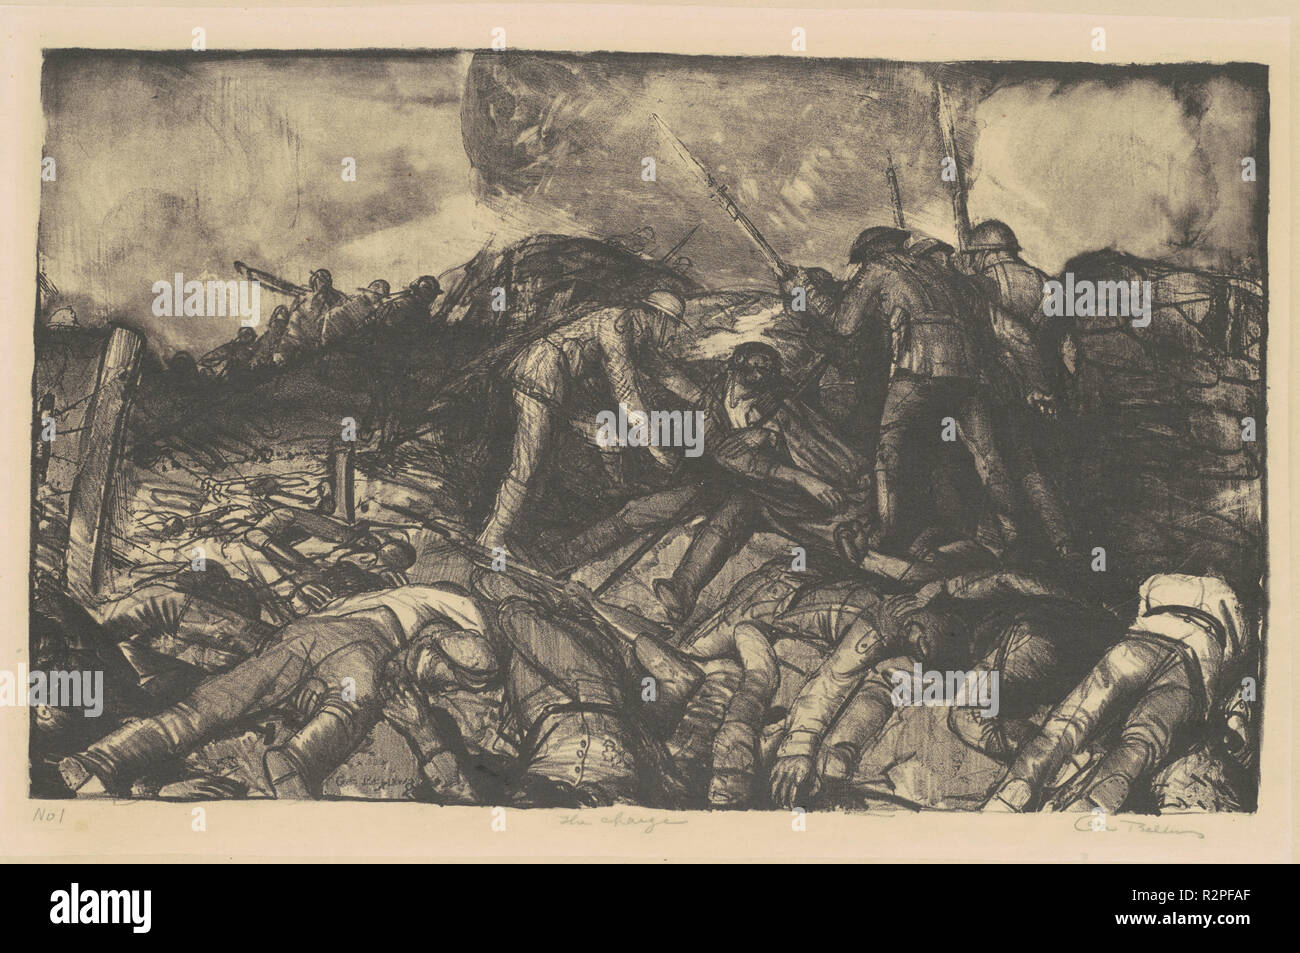 The Charge. Dated: 1918. Dimensions: image: 25.08 × 40.96 cm (9 7/8 × 16 1/8 in.)  sheet: 28.26 × 43.34 cm (11 1/8 × 17 1/16 in.)  support: 37.15 × 55.25 cm (14 5/8 × 21 3/4 in.). Medium: lithograph in black on chine collé. Museum: National Gallery of Art, Washington DC. Author: George Bellows. Stock Photo